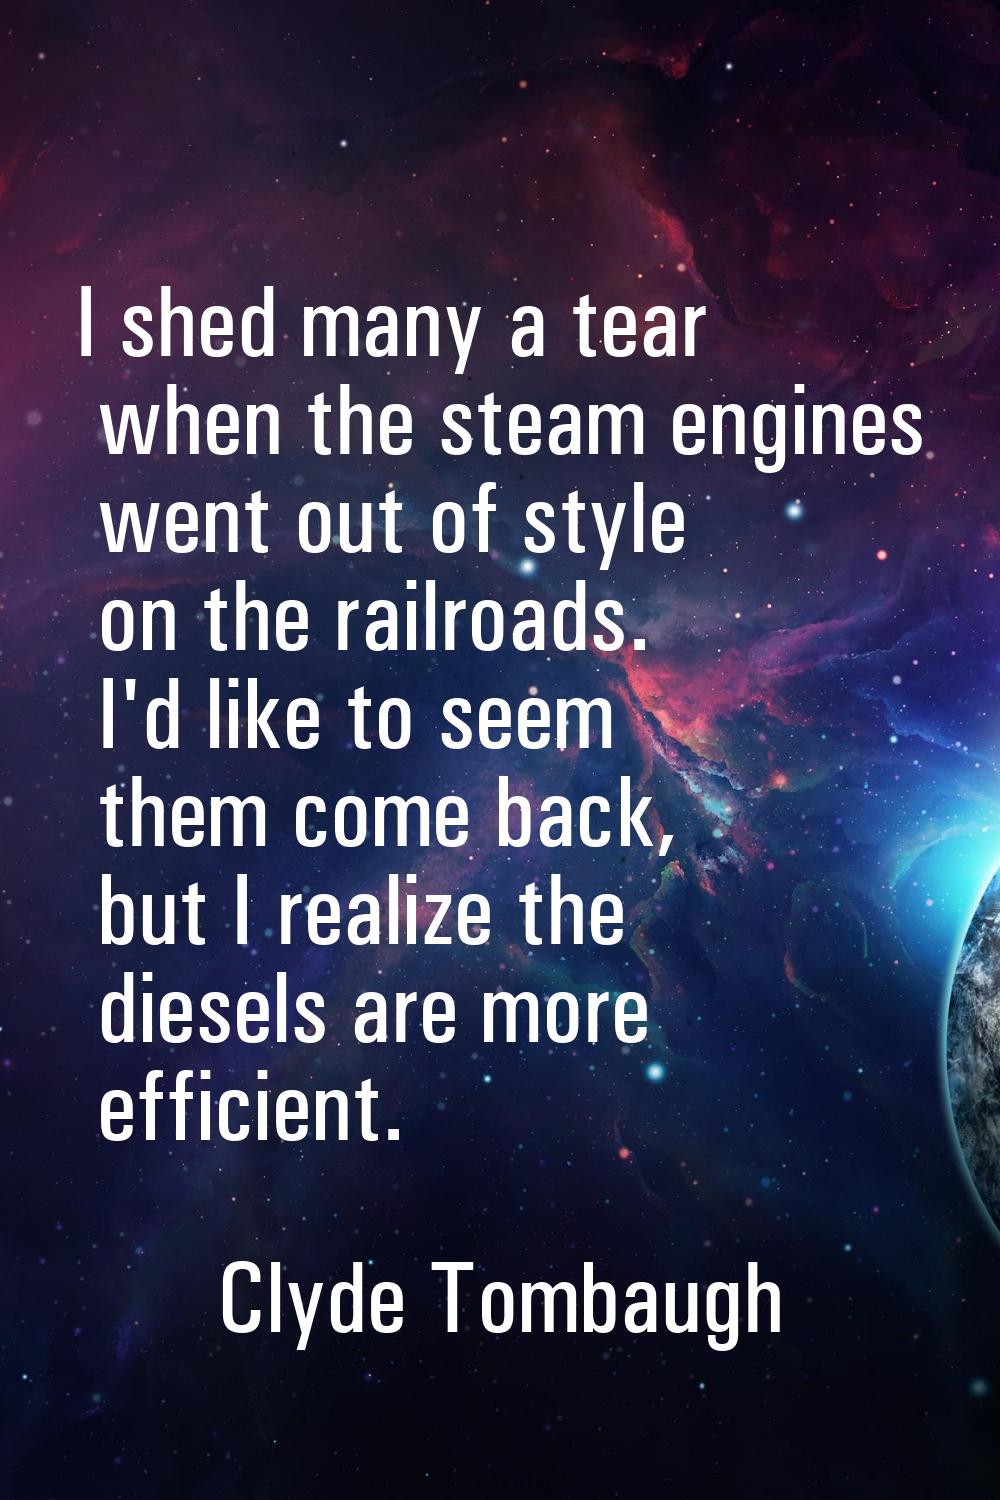 I shed many a tear when the steam engines went out of style on the railroads. I'd like to seem them